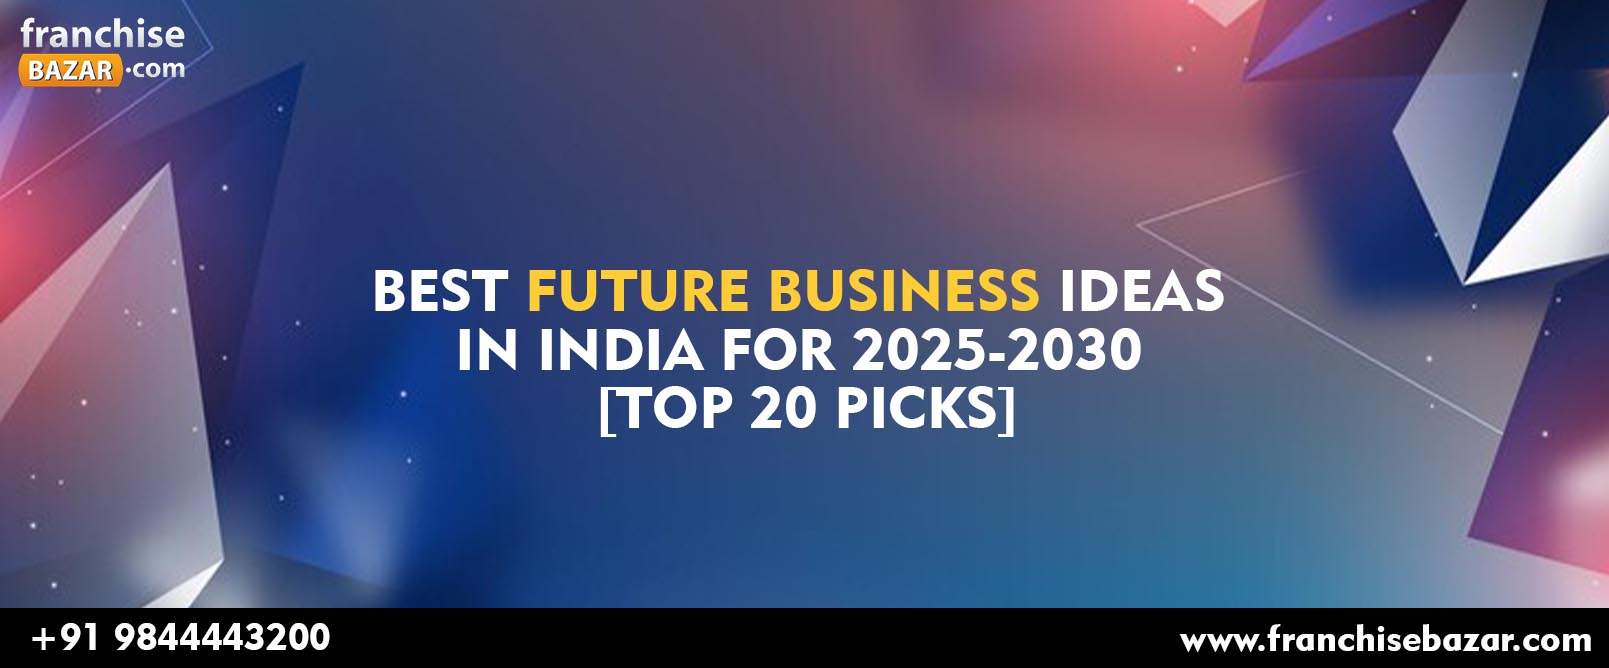 Best Future Business Ideas In India For 2025-2030